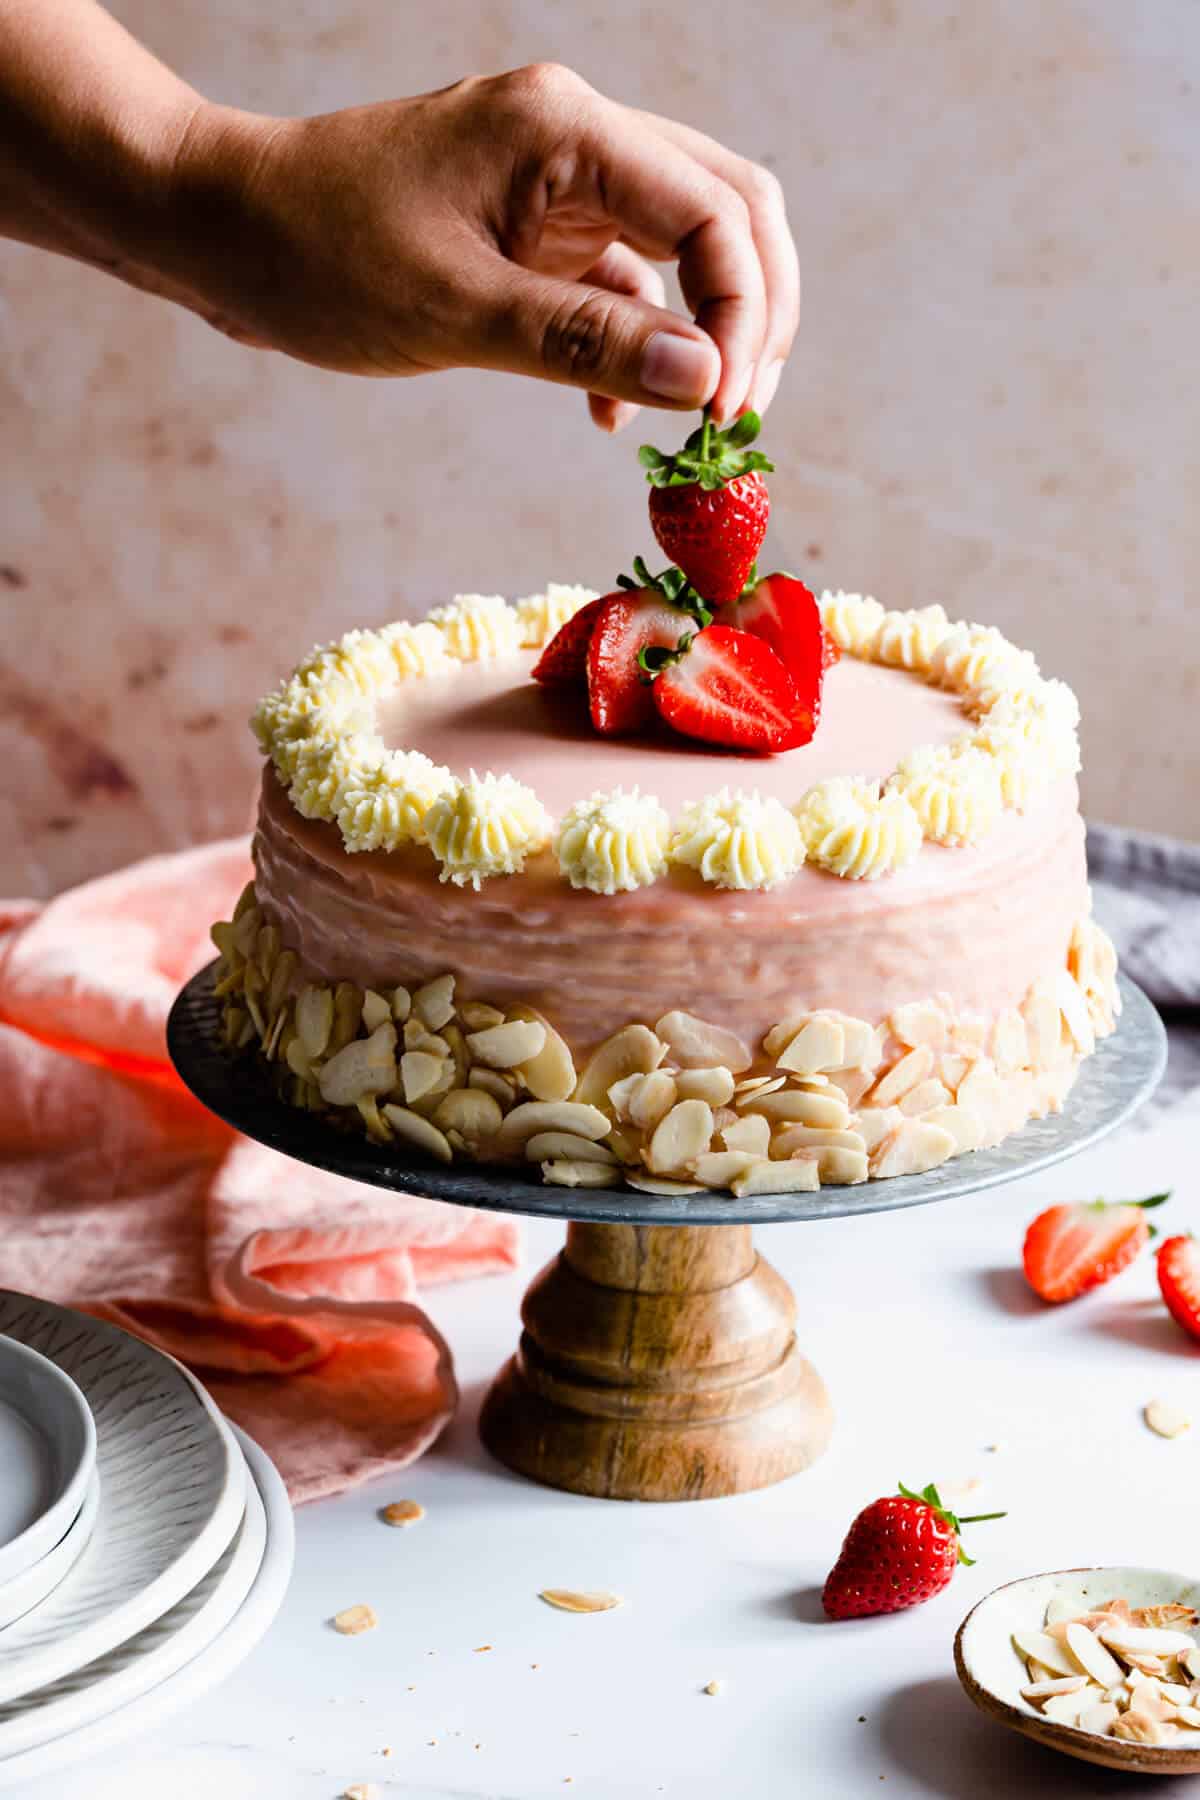 side shot of a hand lifting a strawberry from the top of the cake